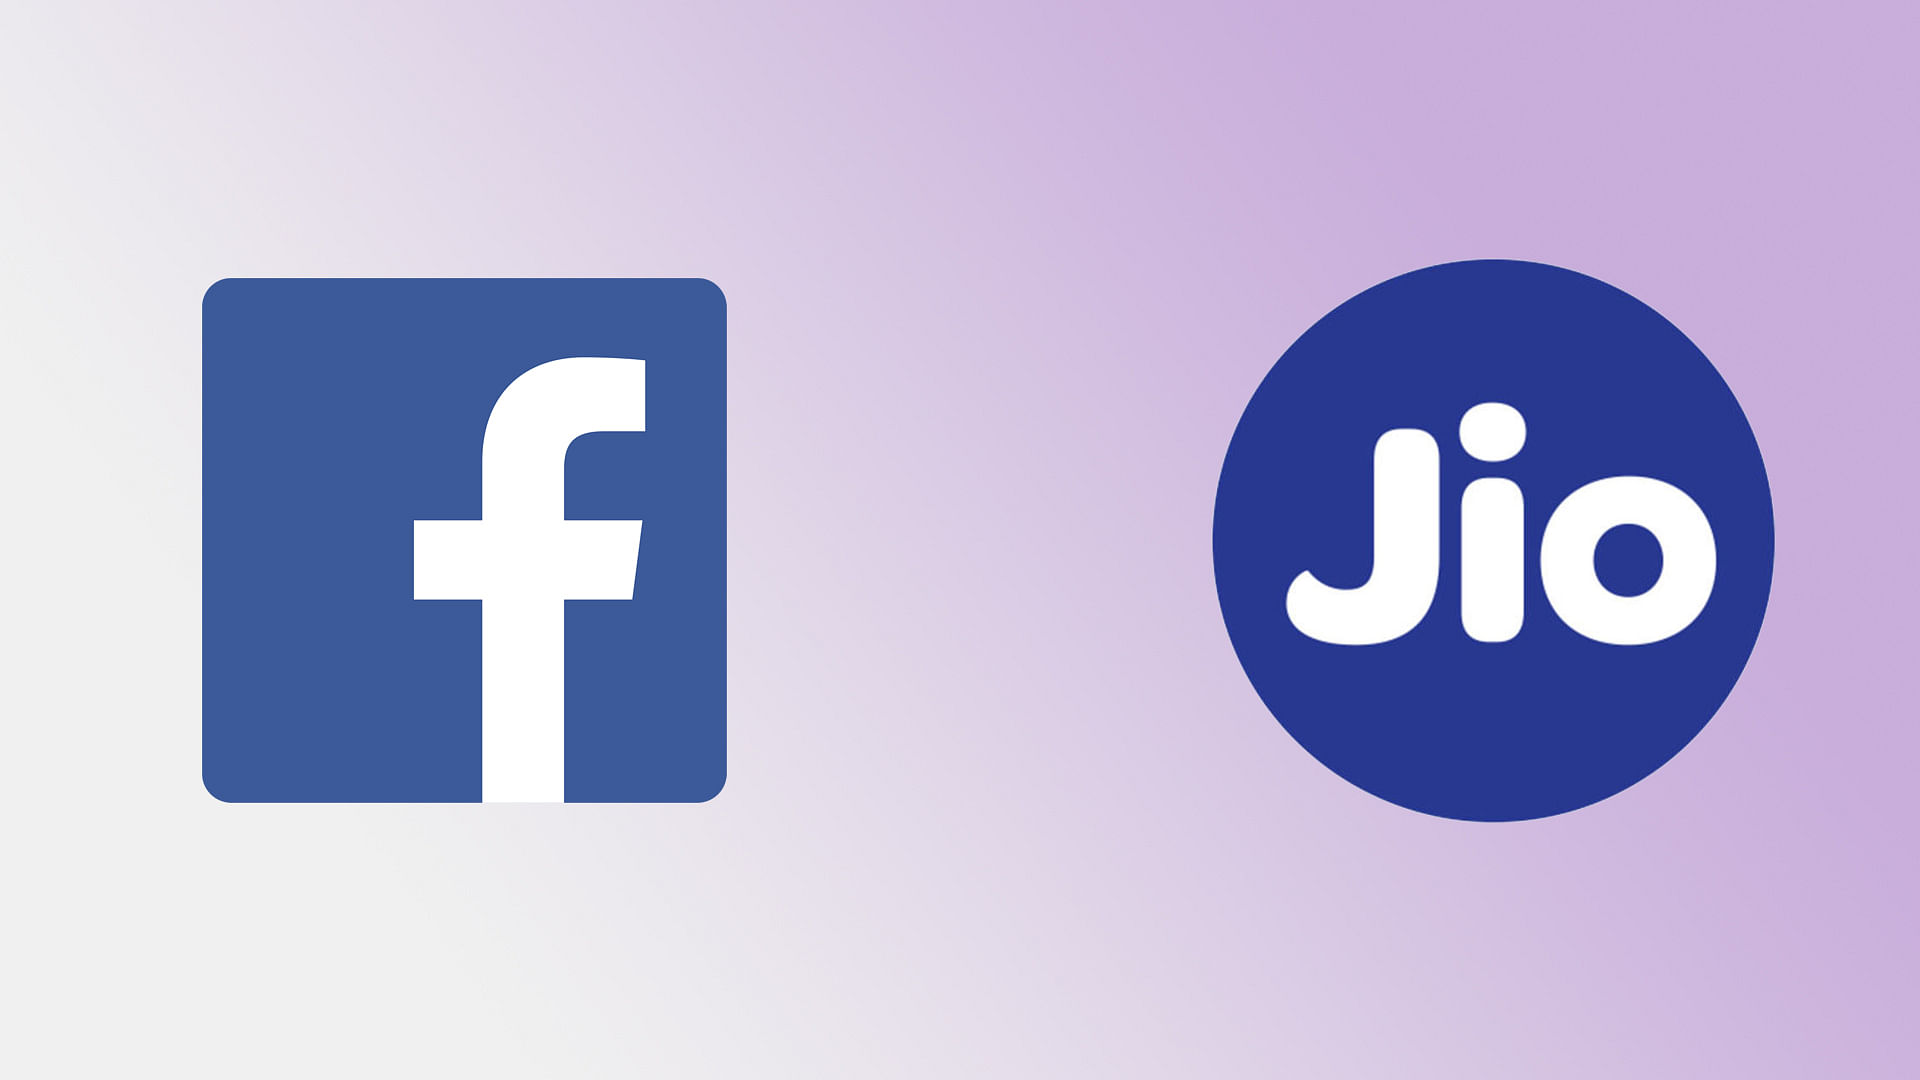 Facebook has purchased a stake in Reliance Jio that’s worth Rs 43,574 crore.